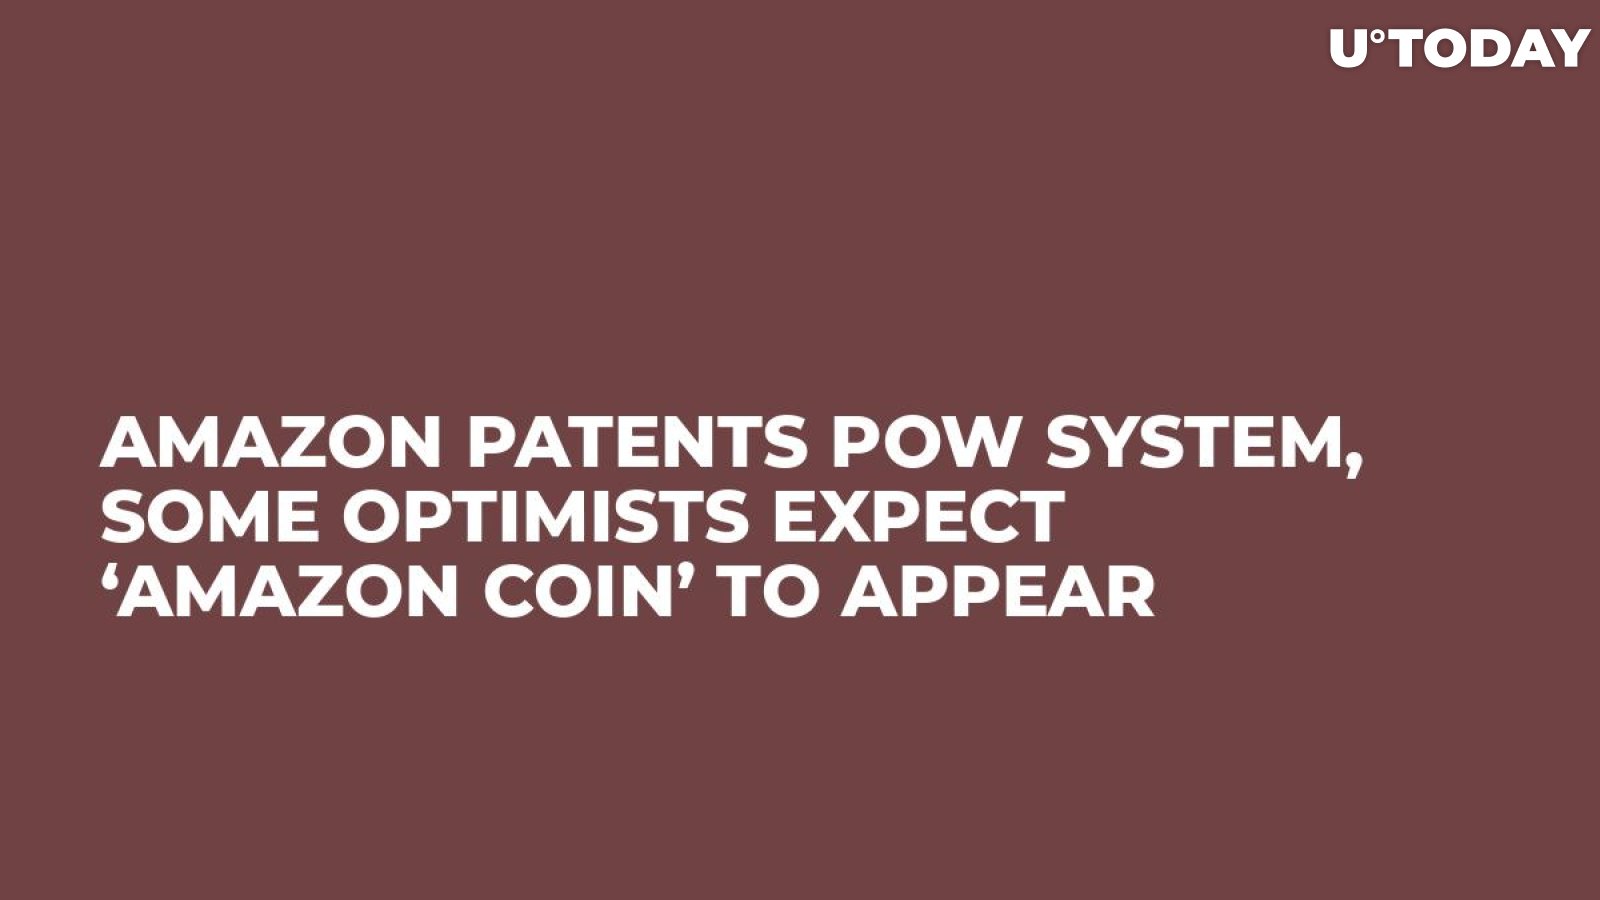 Amazon Patents PoW System, Some Optimists Expect ‘Amazon Coin’ to Appear